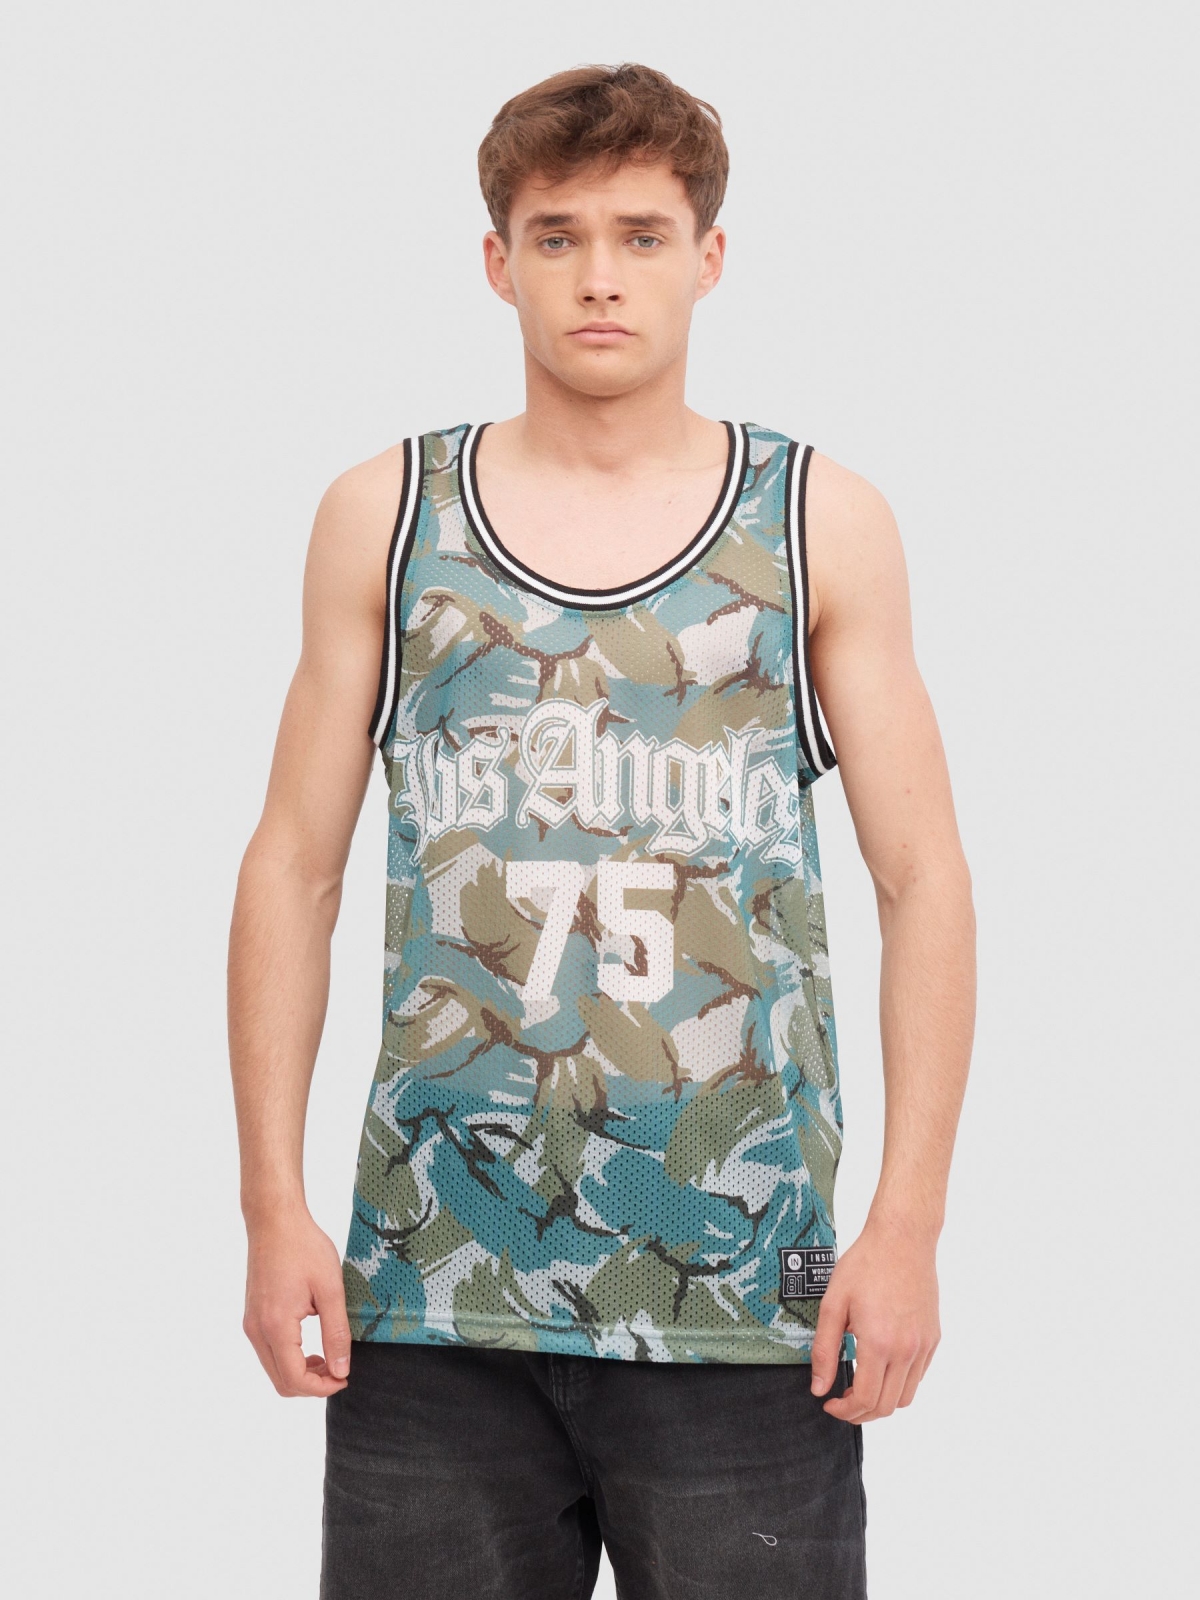 Camouflage sports T-shirt greyish green middle front view